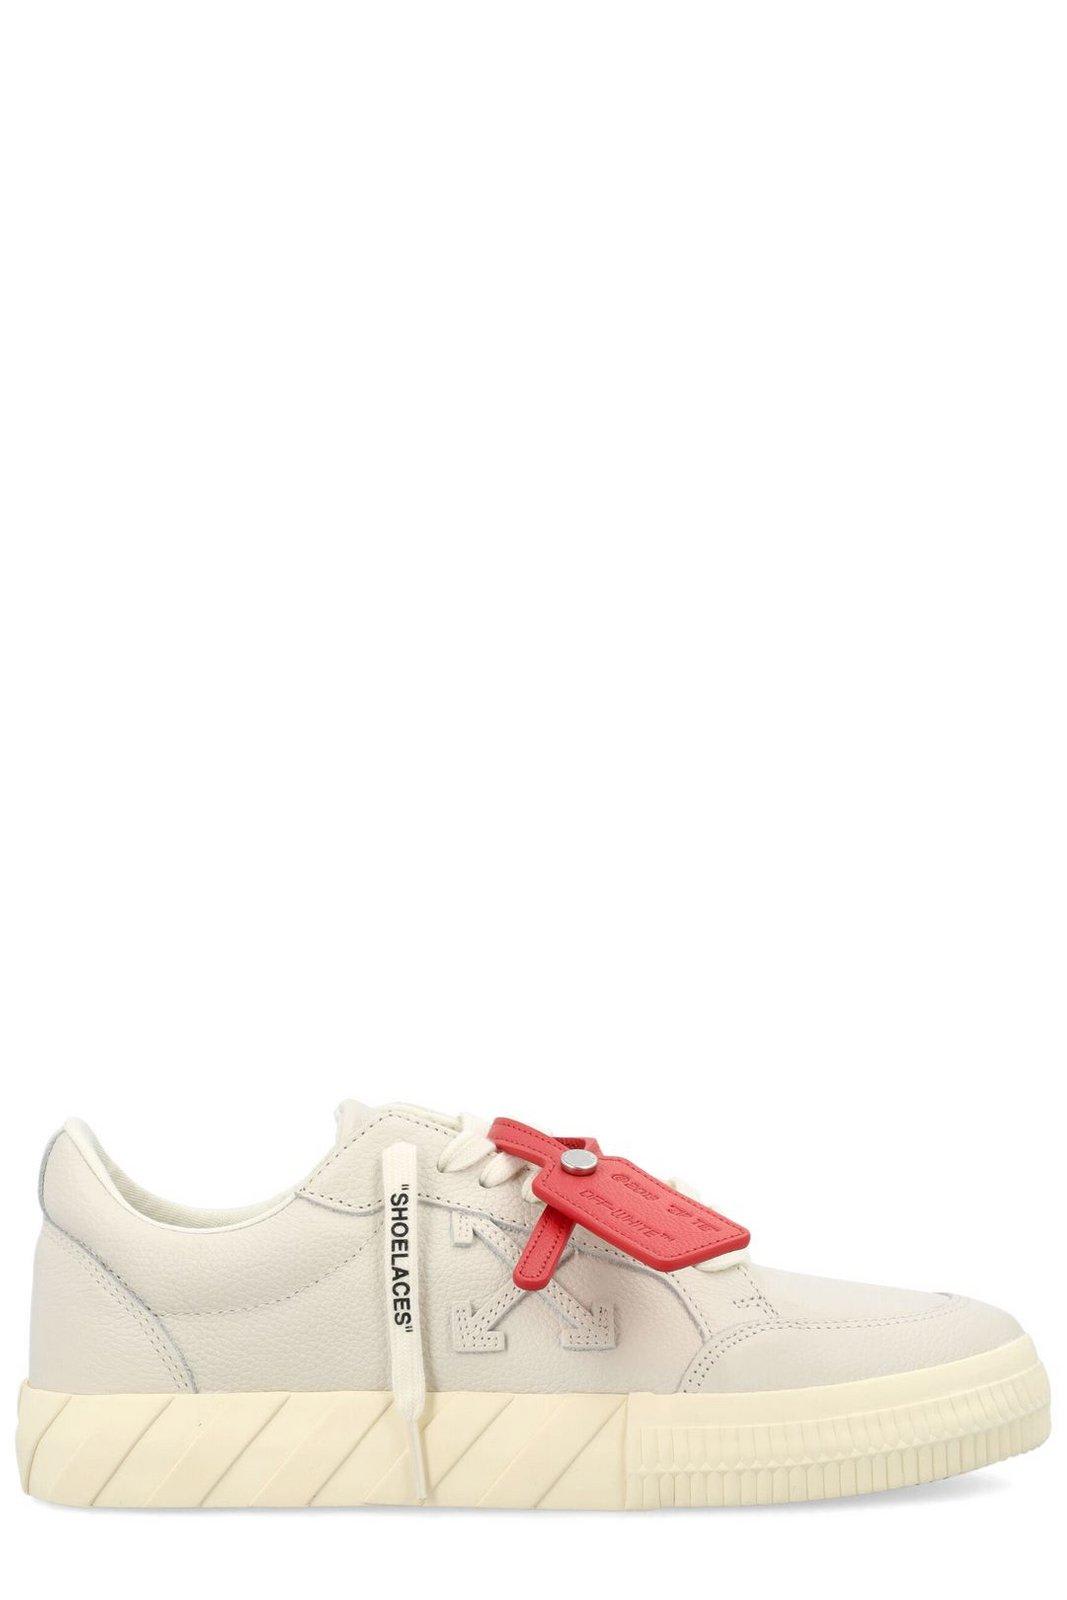 OFF-WHITE VULCANIZED LACE-UP SNEAKERS